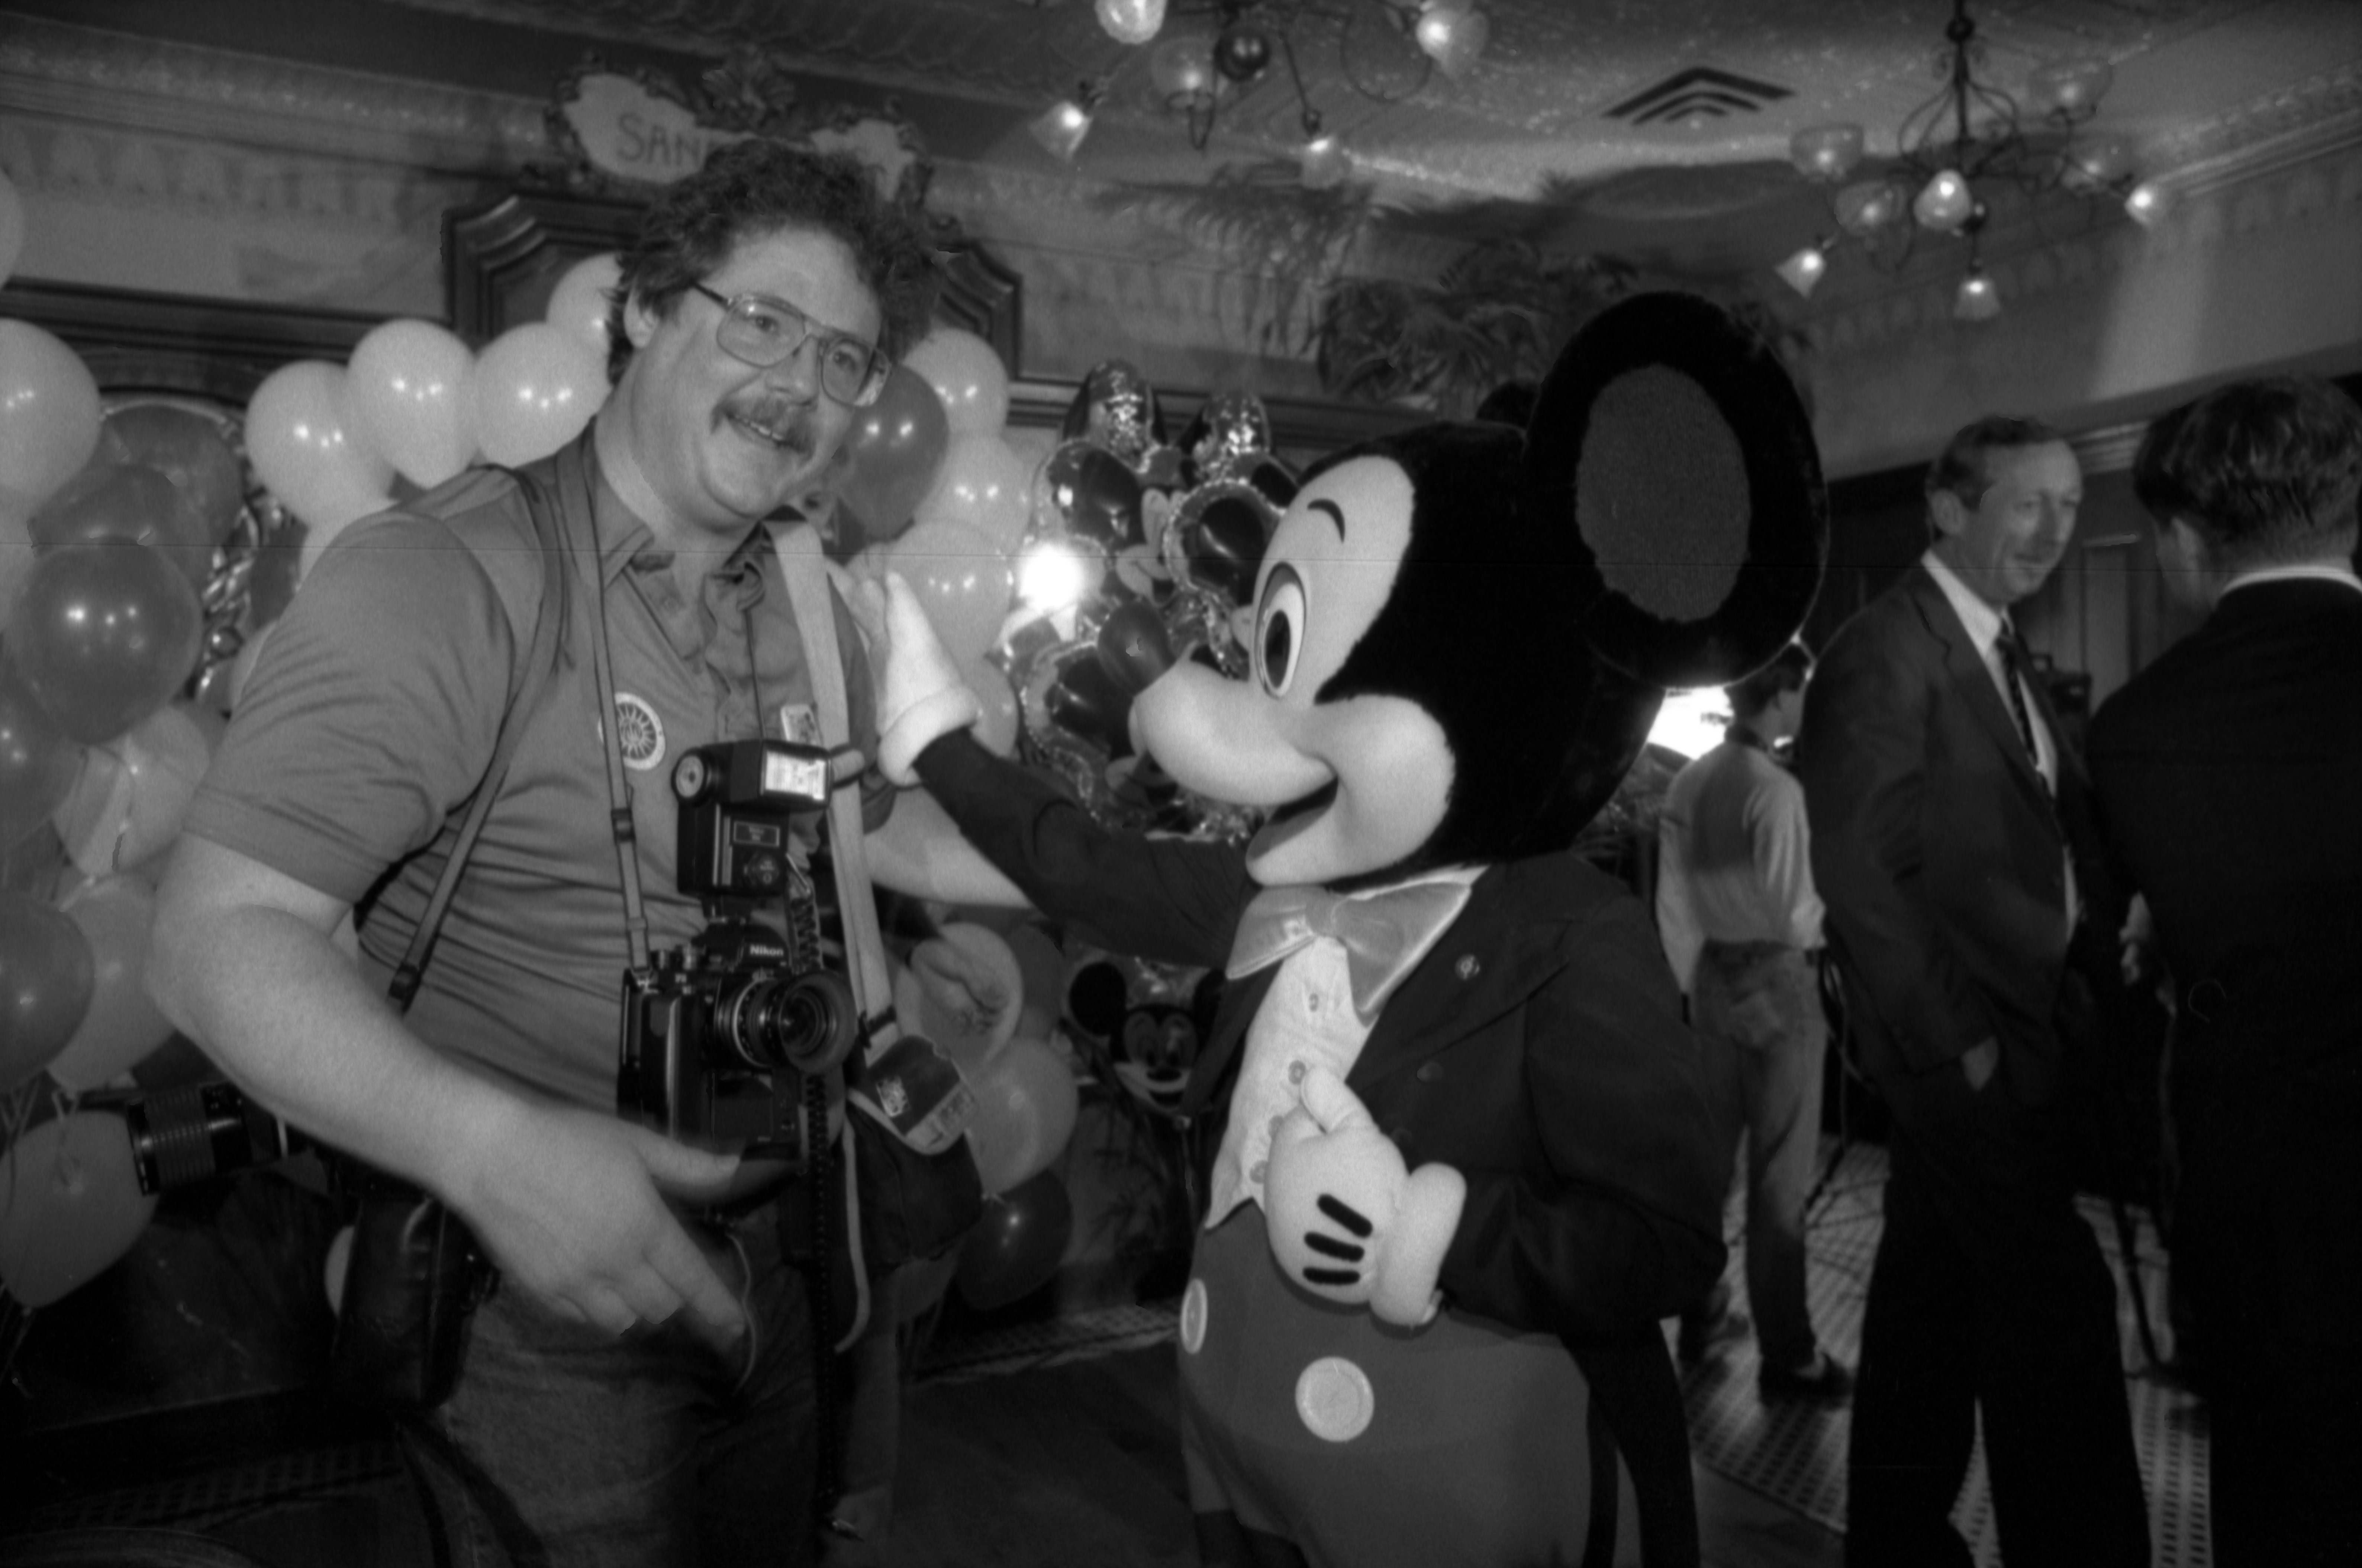 Someone in a Mickey Mouse costume puts a hand on a man's shoulder. The man is holding up a camera. 